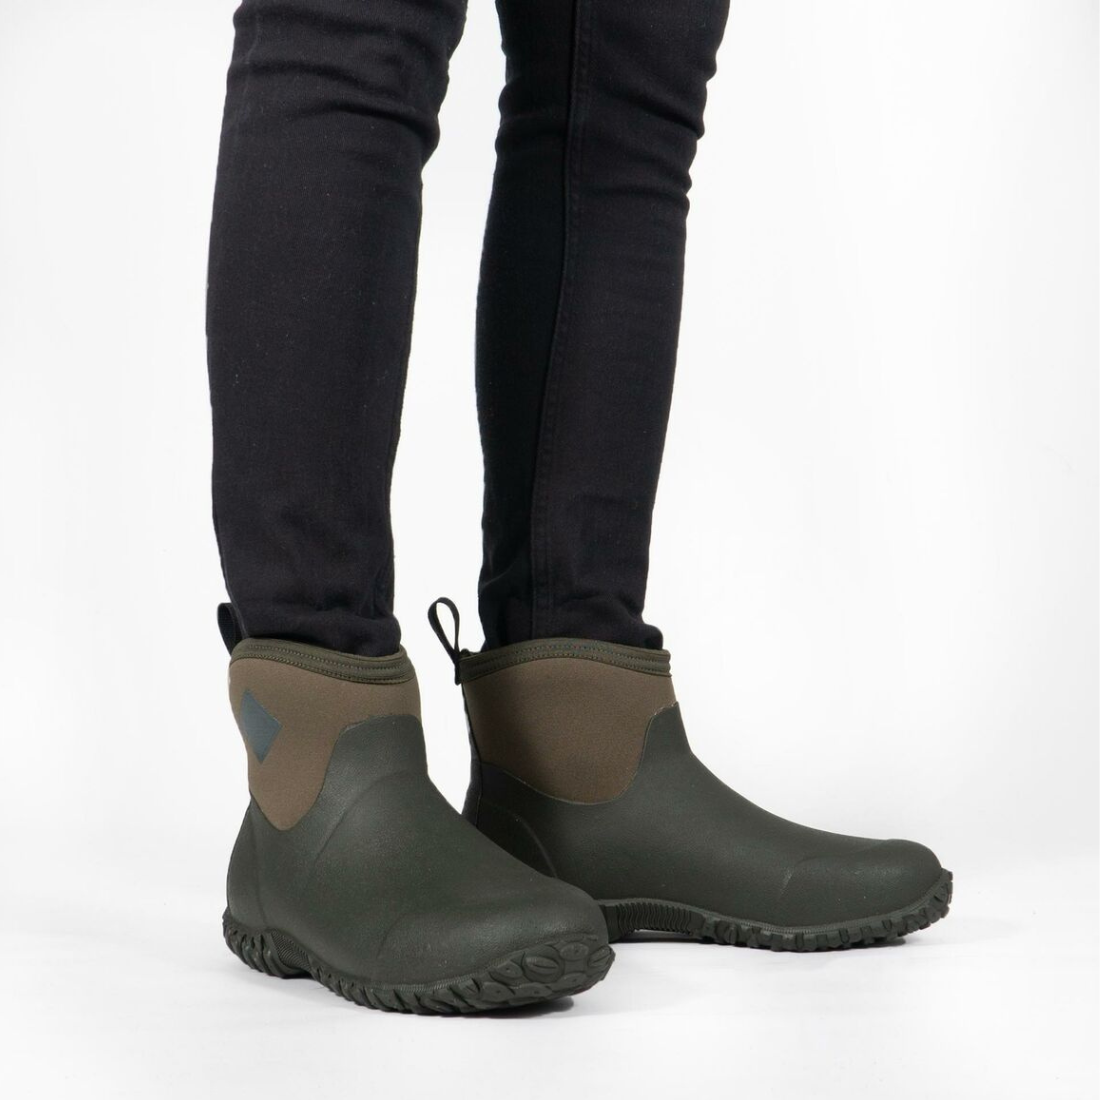 Muckster Waterproof Ankle Work Boots Workboots by Muck Boots | The Bloke Shop